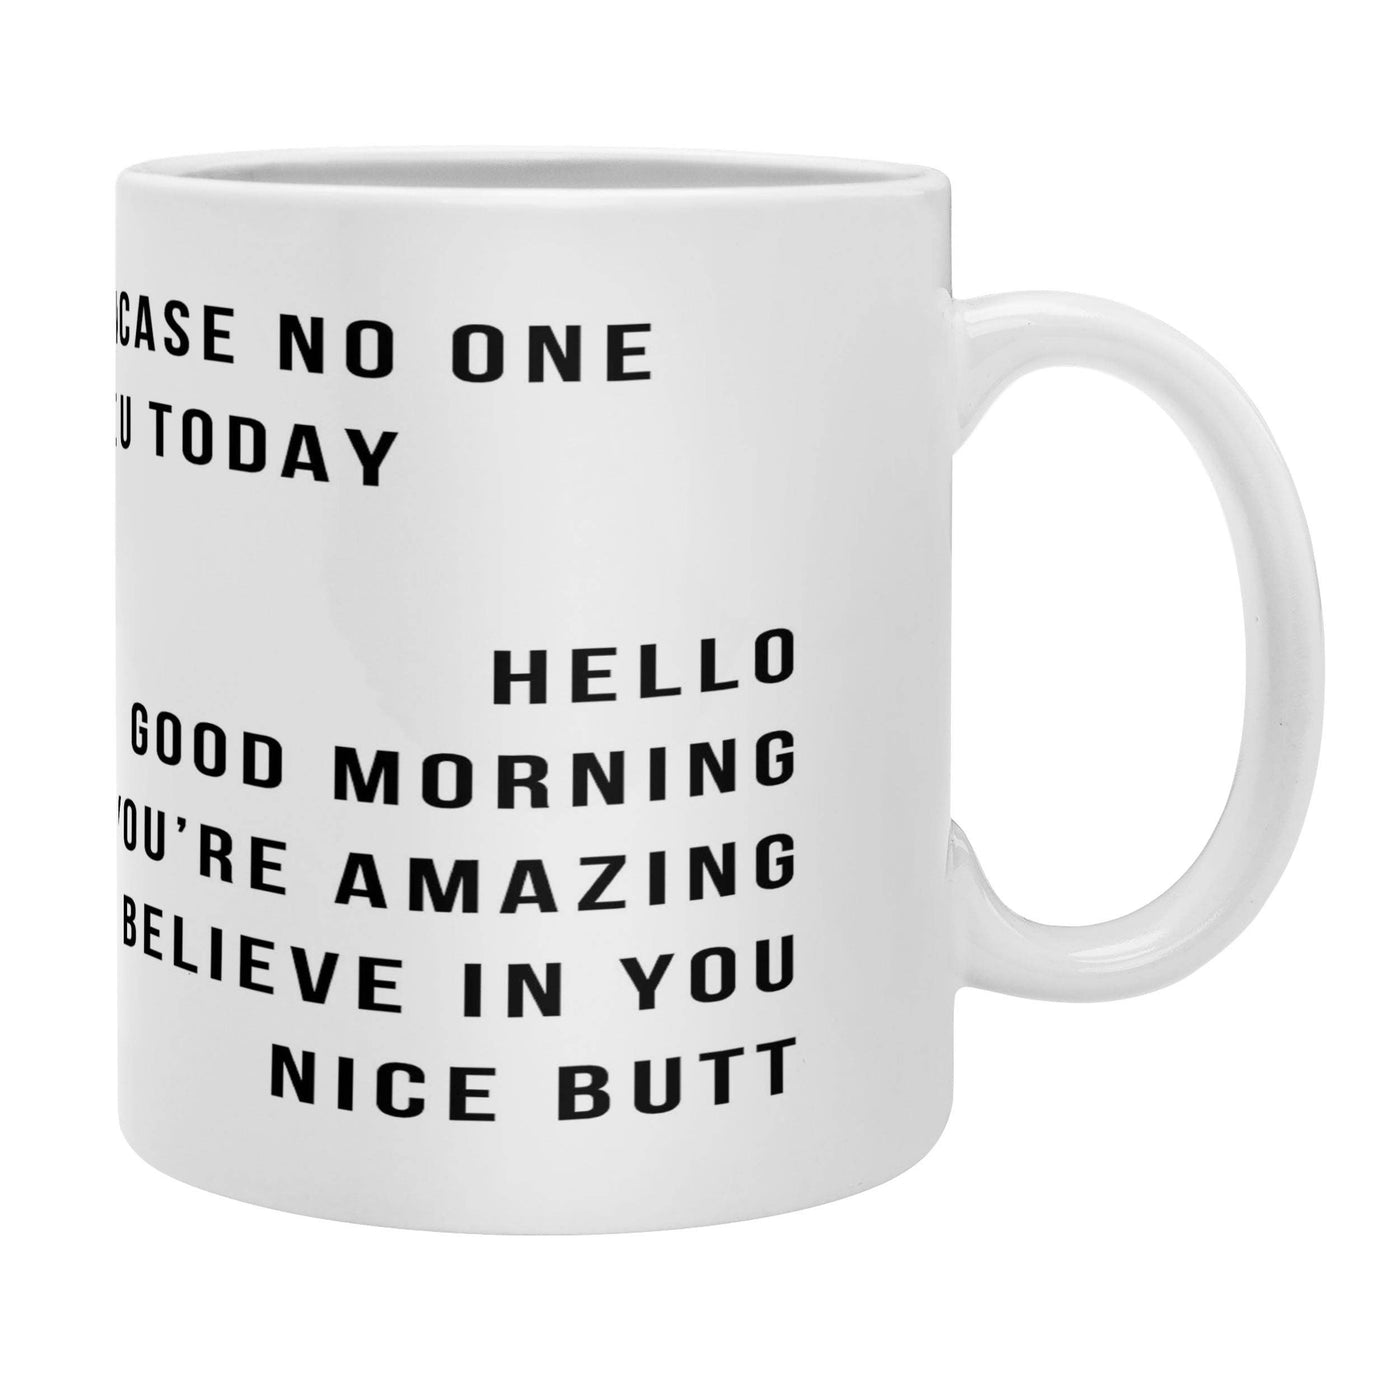 Just In Case No One Told You Coffee Mug